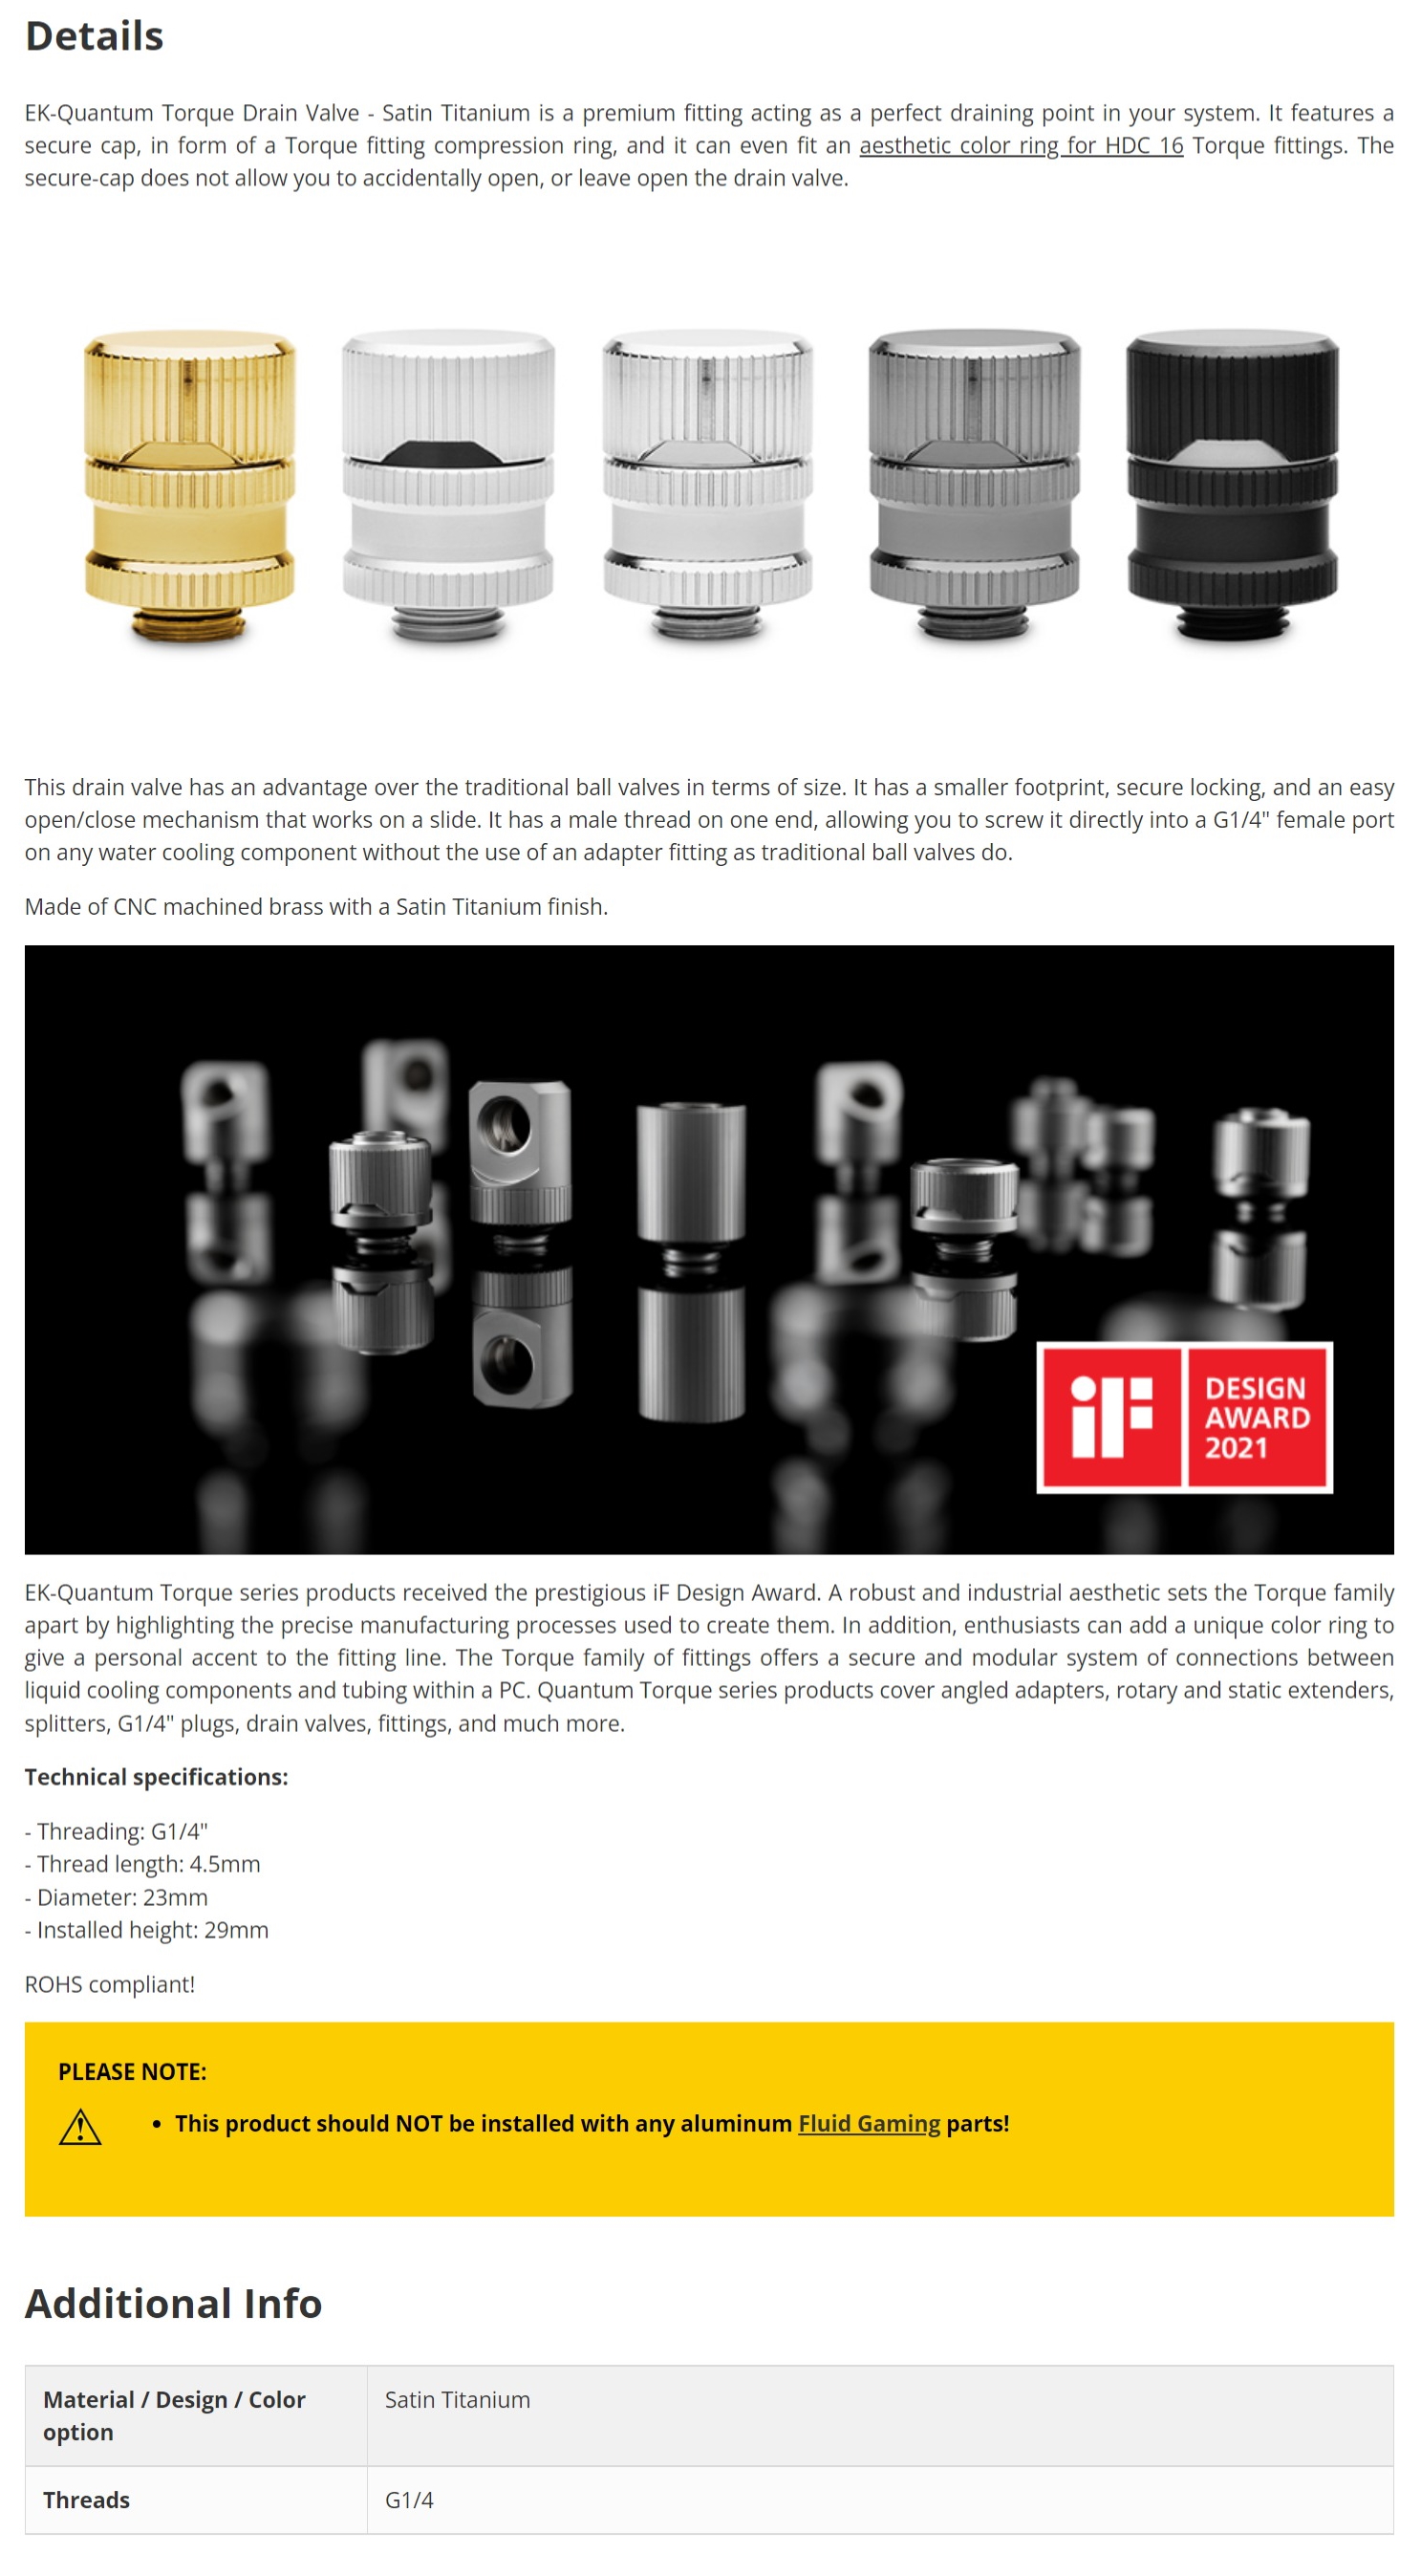 A large marketing image providing additional information about the product EK Quantum Torque Drain Valve - Nickel - Additional alt info not provided